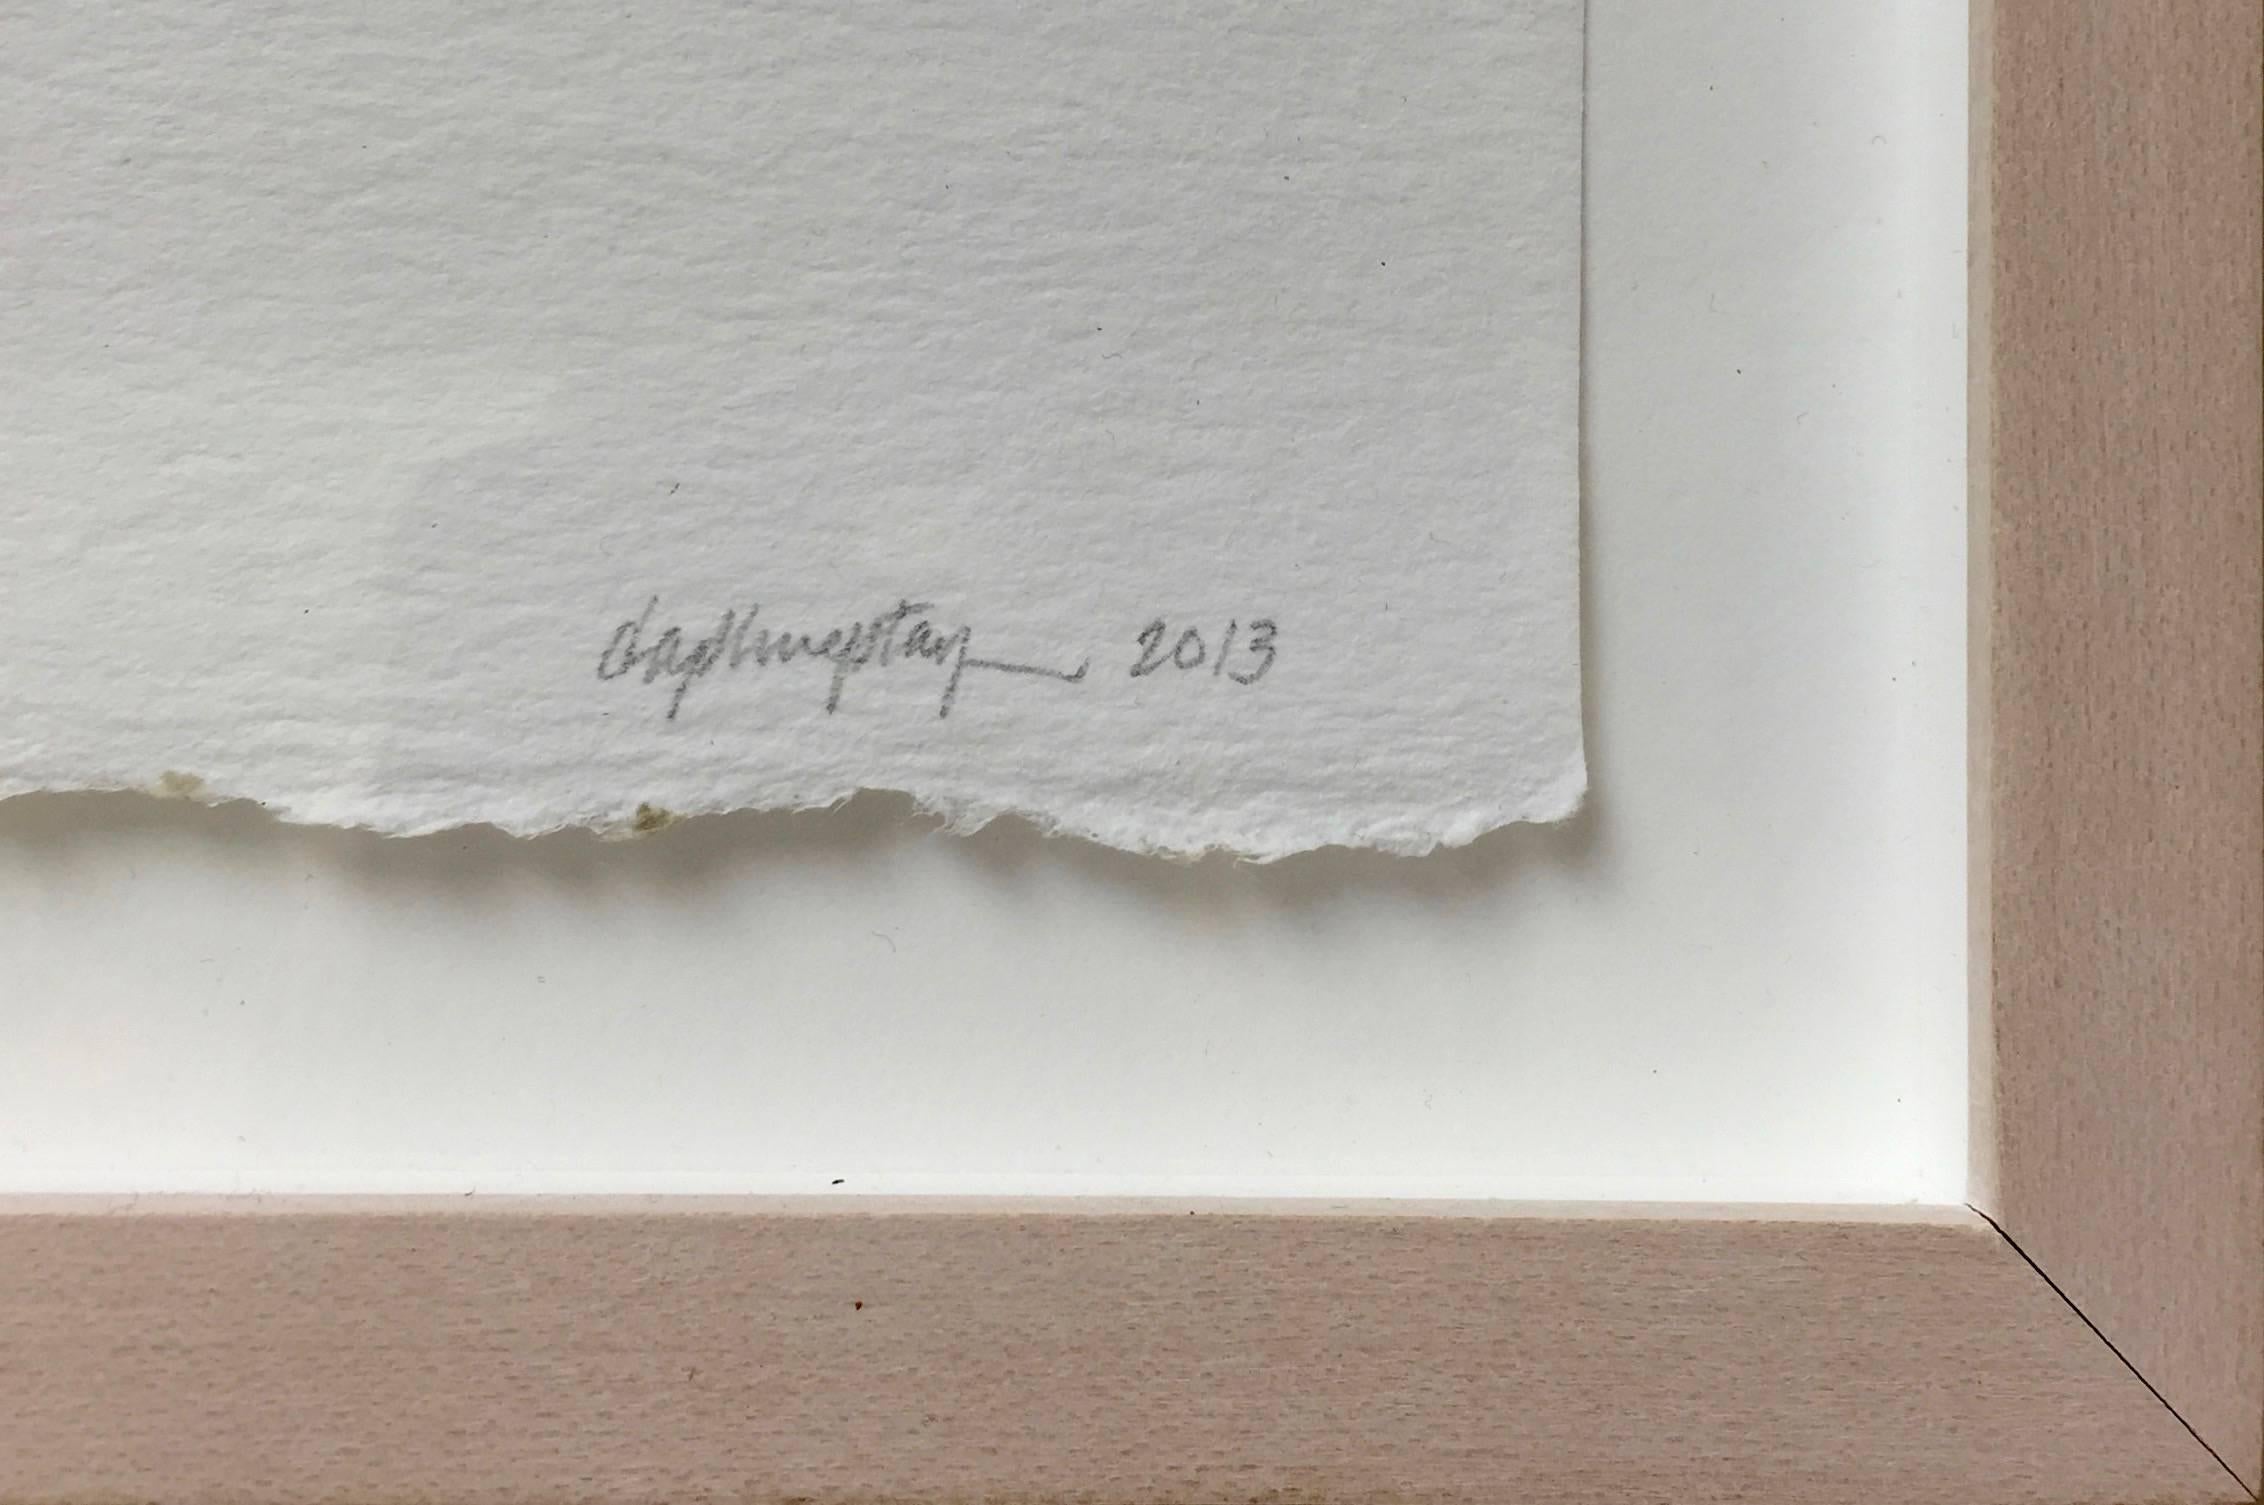 Daphne Taylor, "Contemplative Fragment Series #4", fabric fragment, metallic foil, graphite, hand stitched, mounted in paper, 4.75" x 5.5"
Framed in a white wood frame. Framed dimensions are 8.25" x 8.25". 

As part